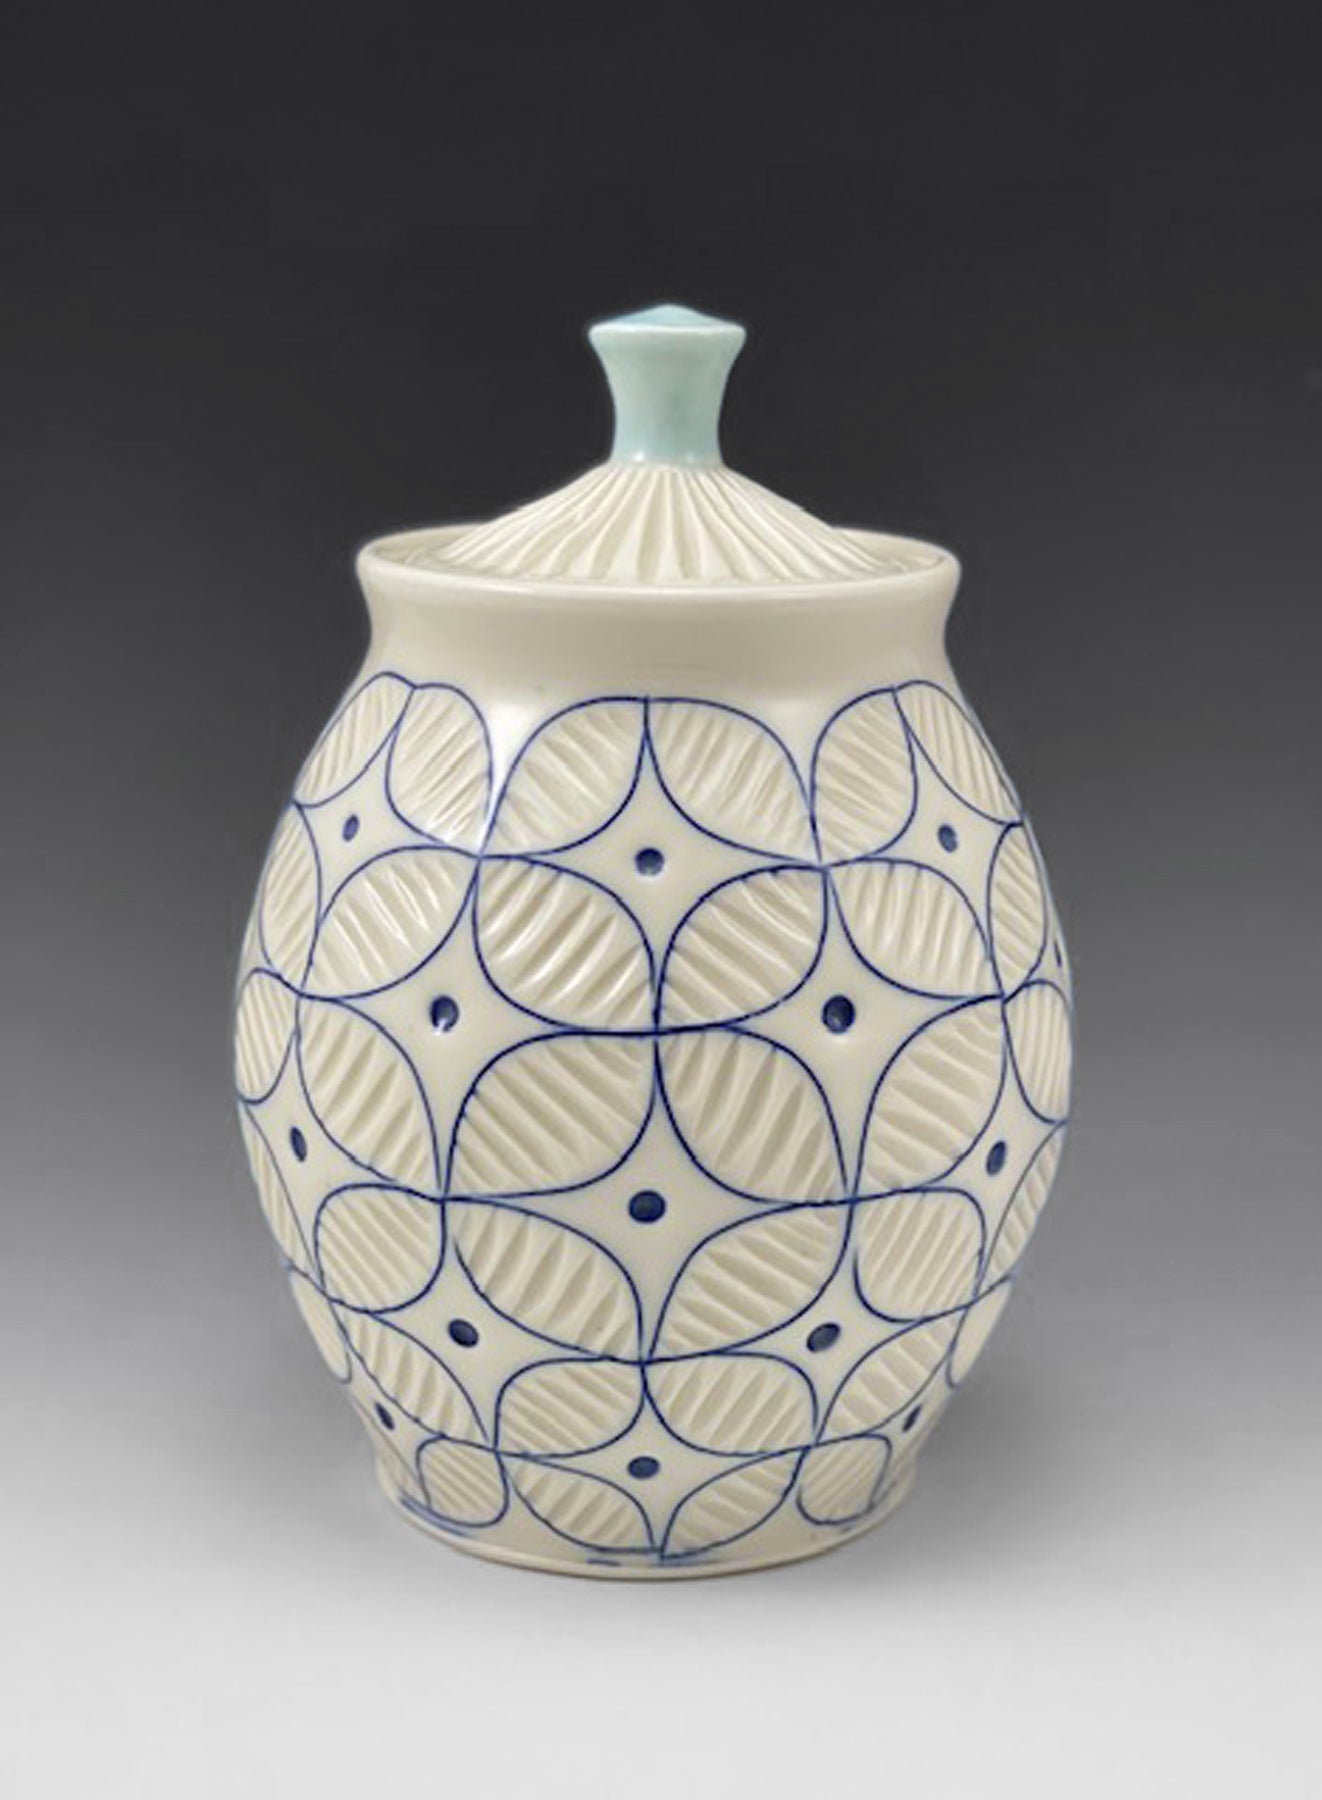 A white handmade porcelain jar with blue inlay by ceramic artist Julie Wiggins sits against a gradient background. 